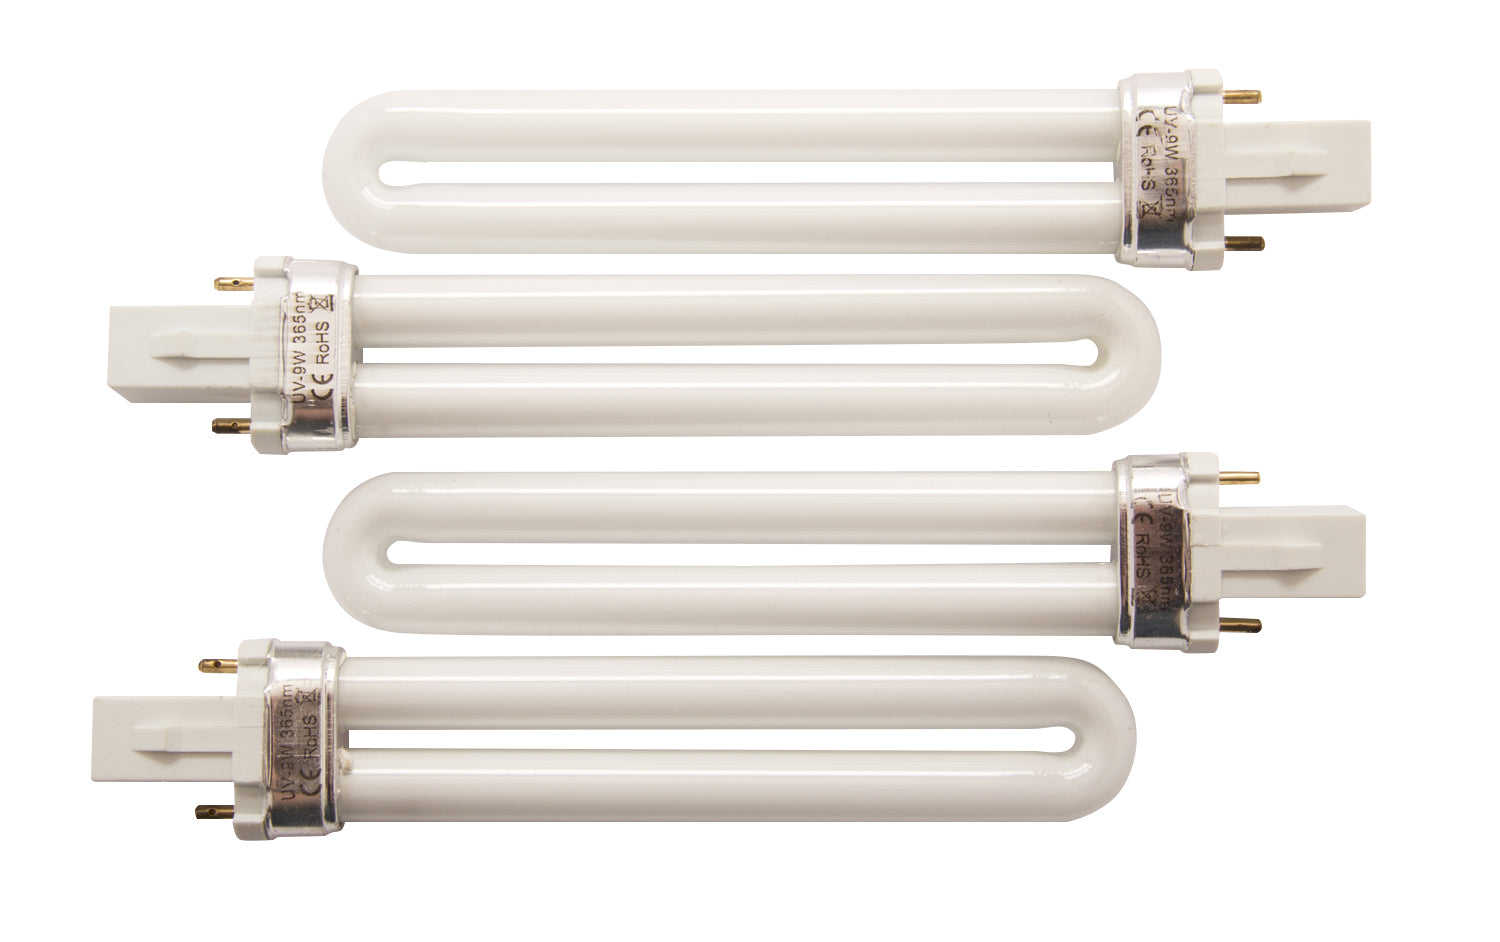 A set of 4 replacement bulbs for the Professional 36W UV & Gel Polish Nail Lamp